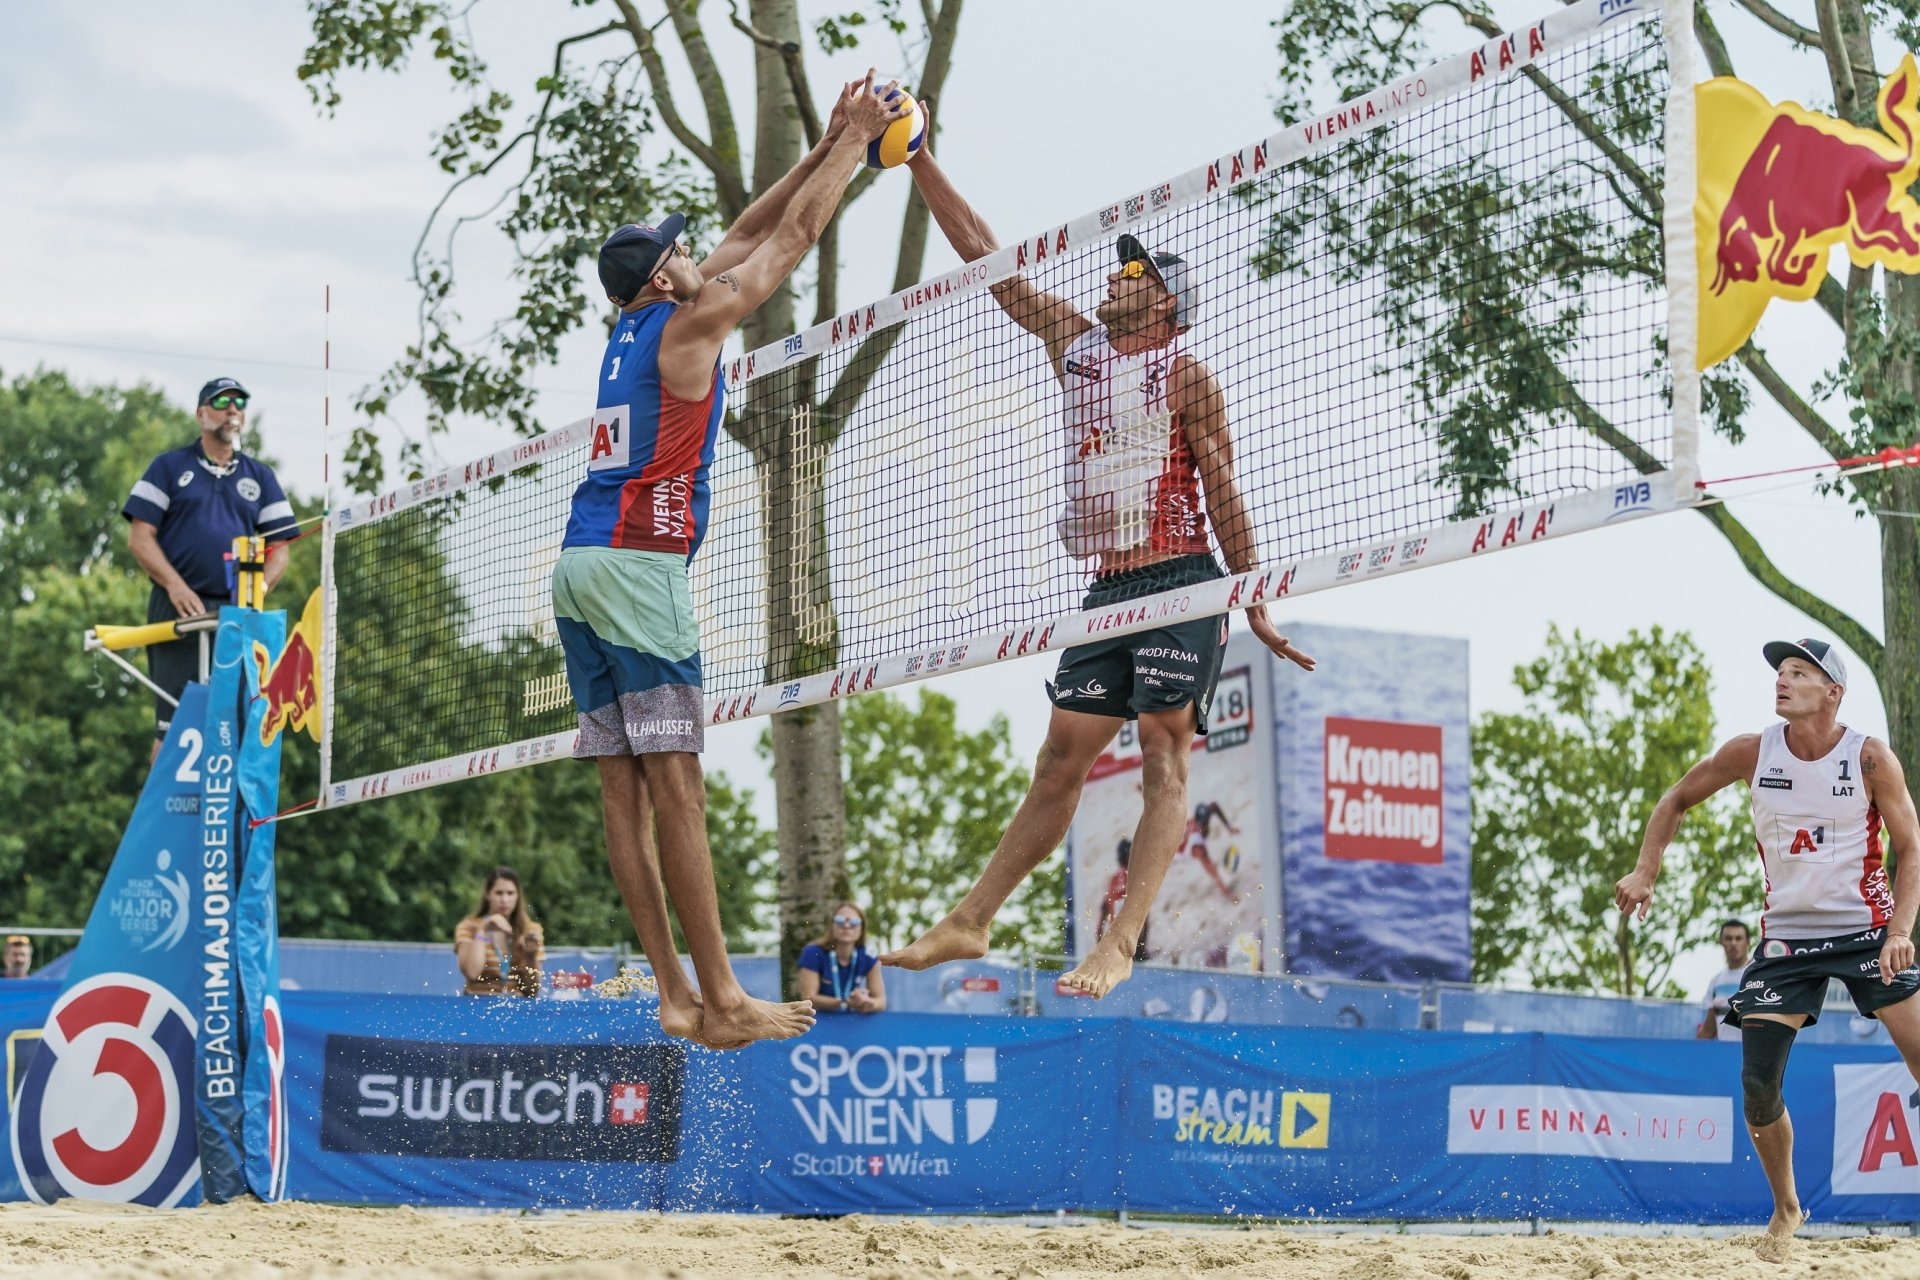 Tocs battles with Dalhausser at the net